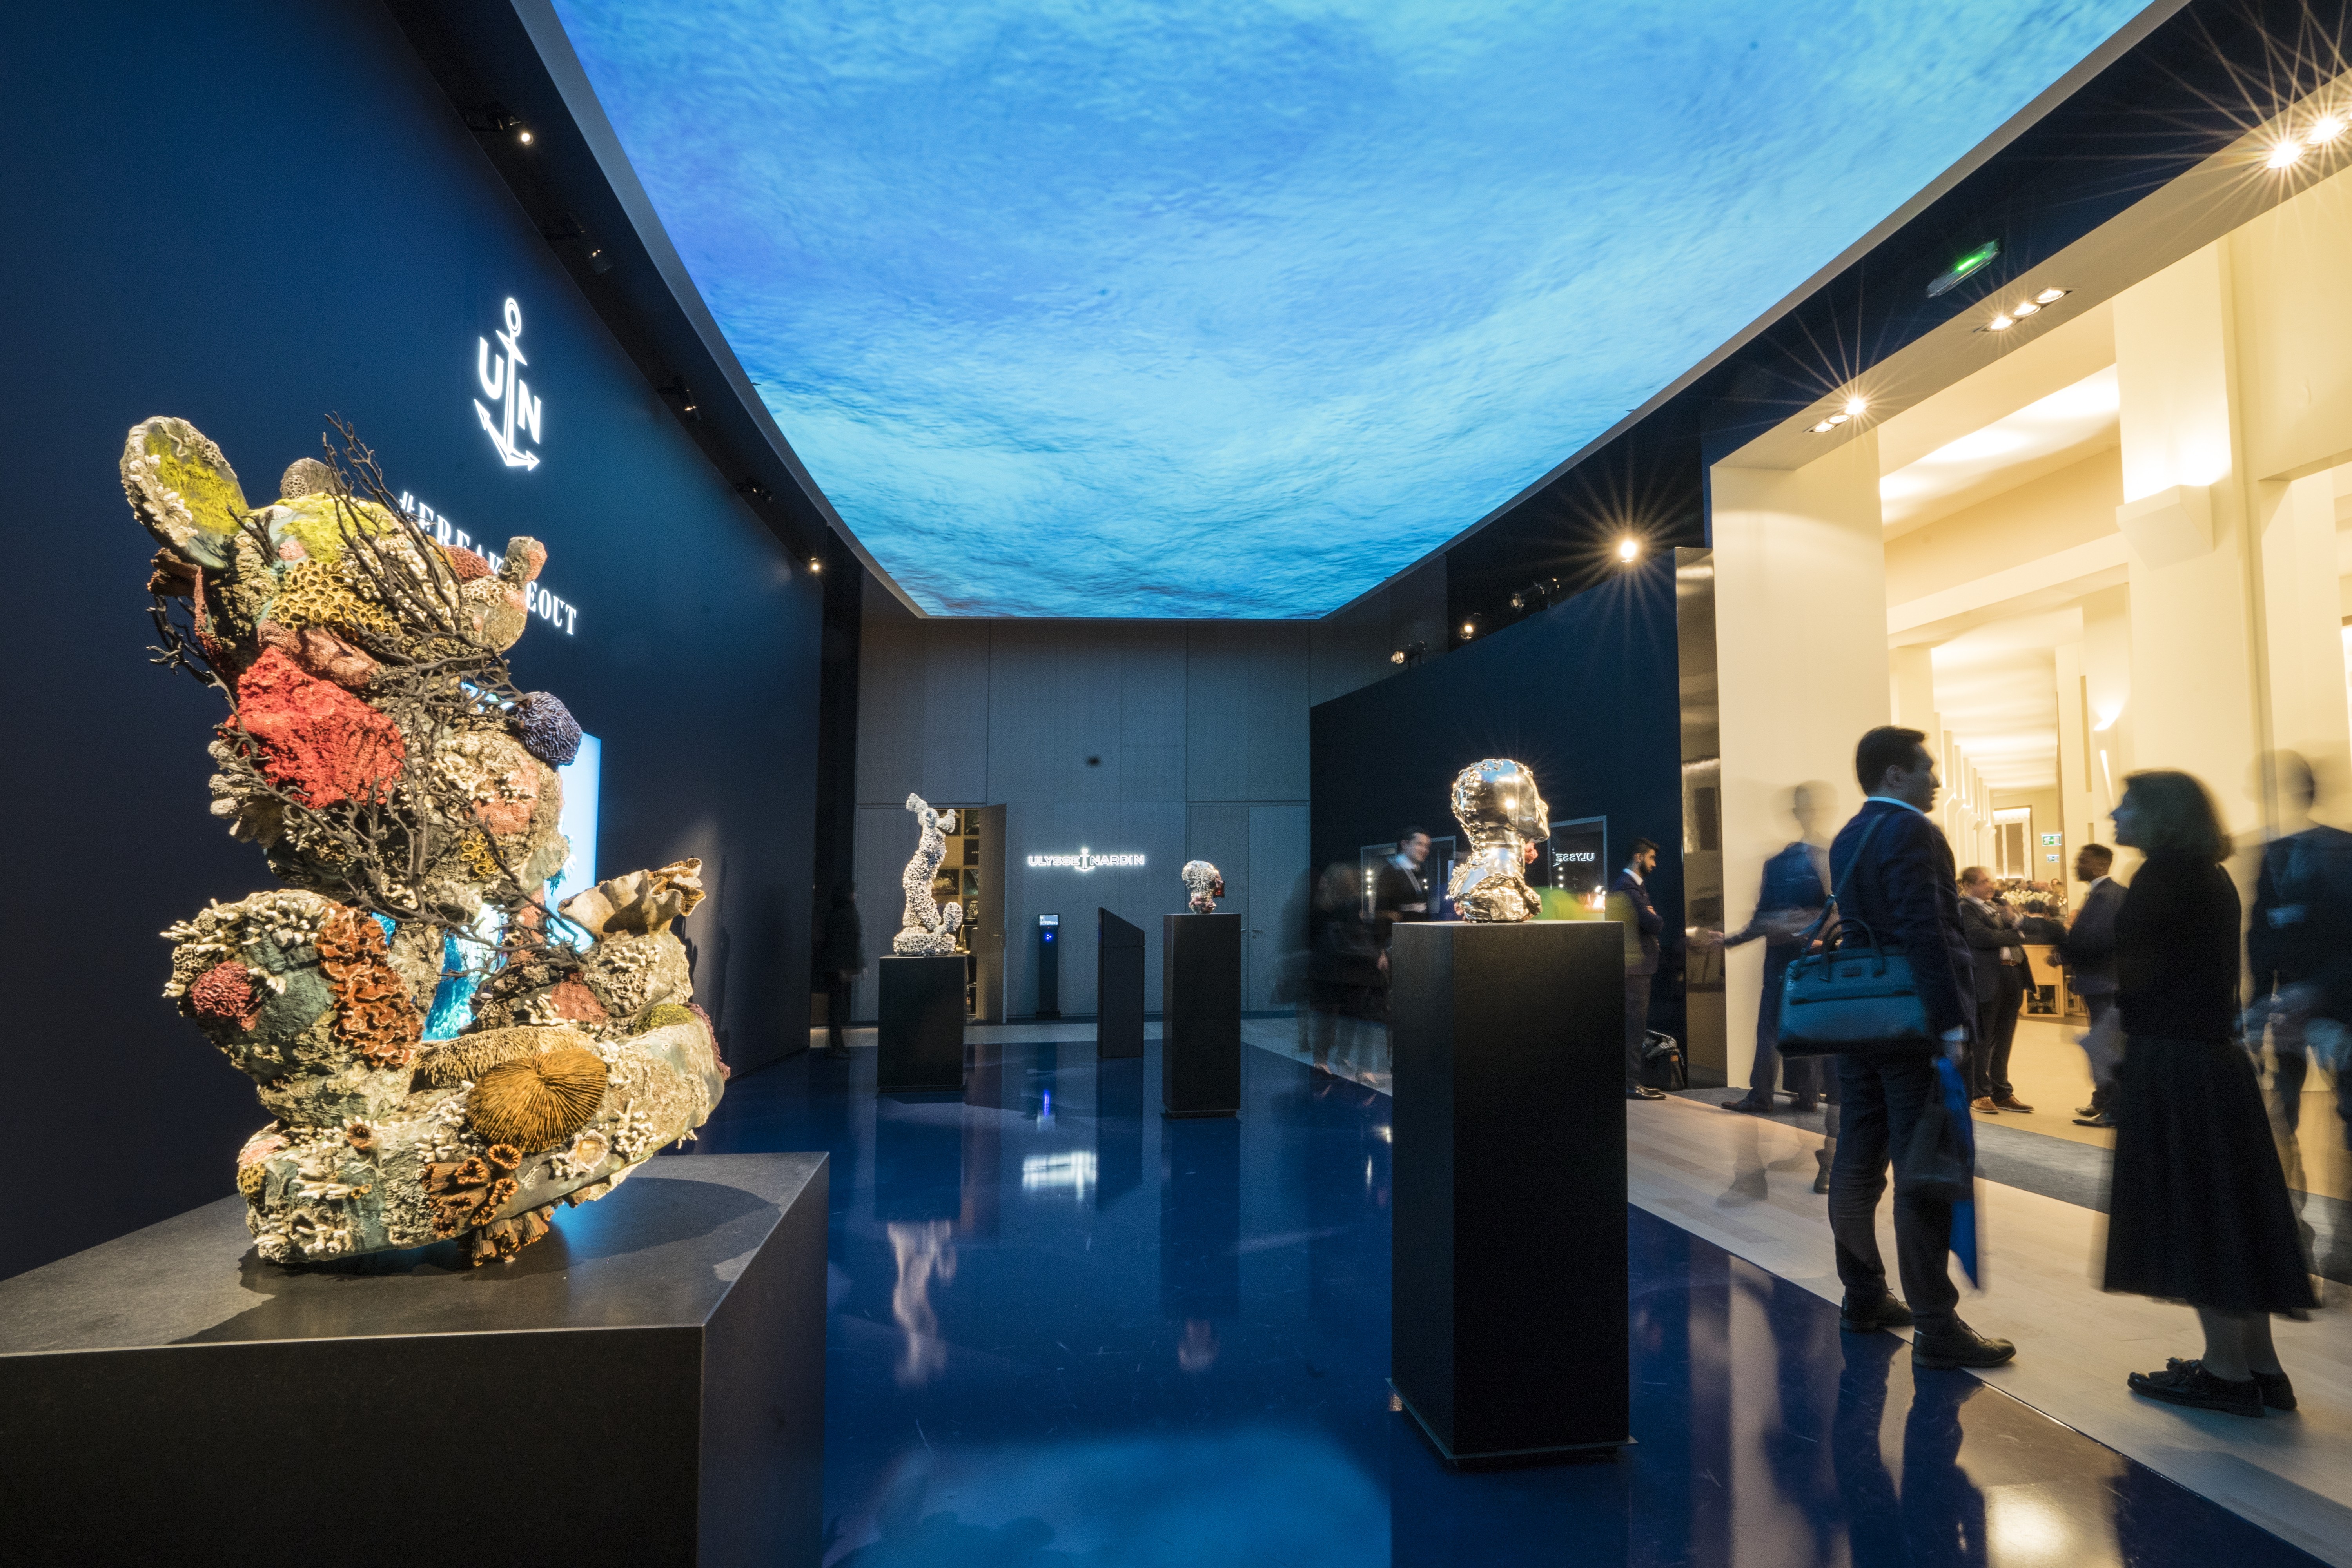 Ulysse Nardin's booth at SIHH 2018 features sculptures by contemporary British artist Damien Hirst. Photo: Anders Modig